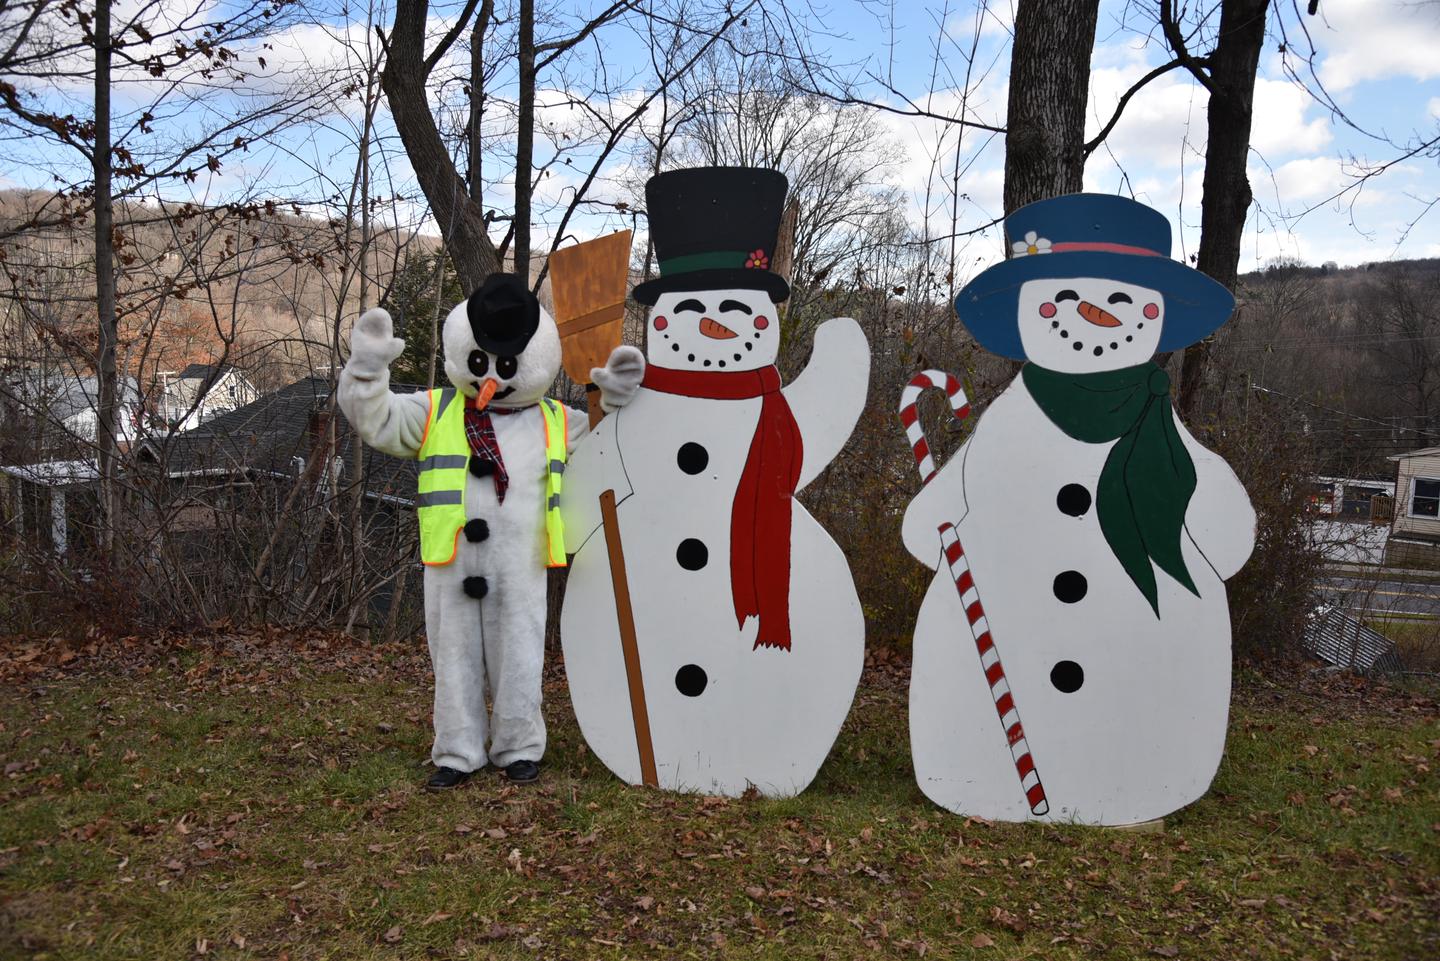 There are three snow people.  Two are large wooden displays .  One is a person in costume wearing a safety vest.Three Amigos